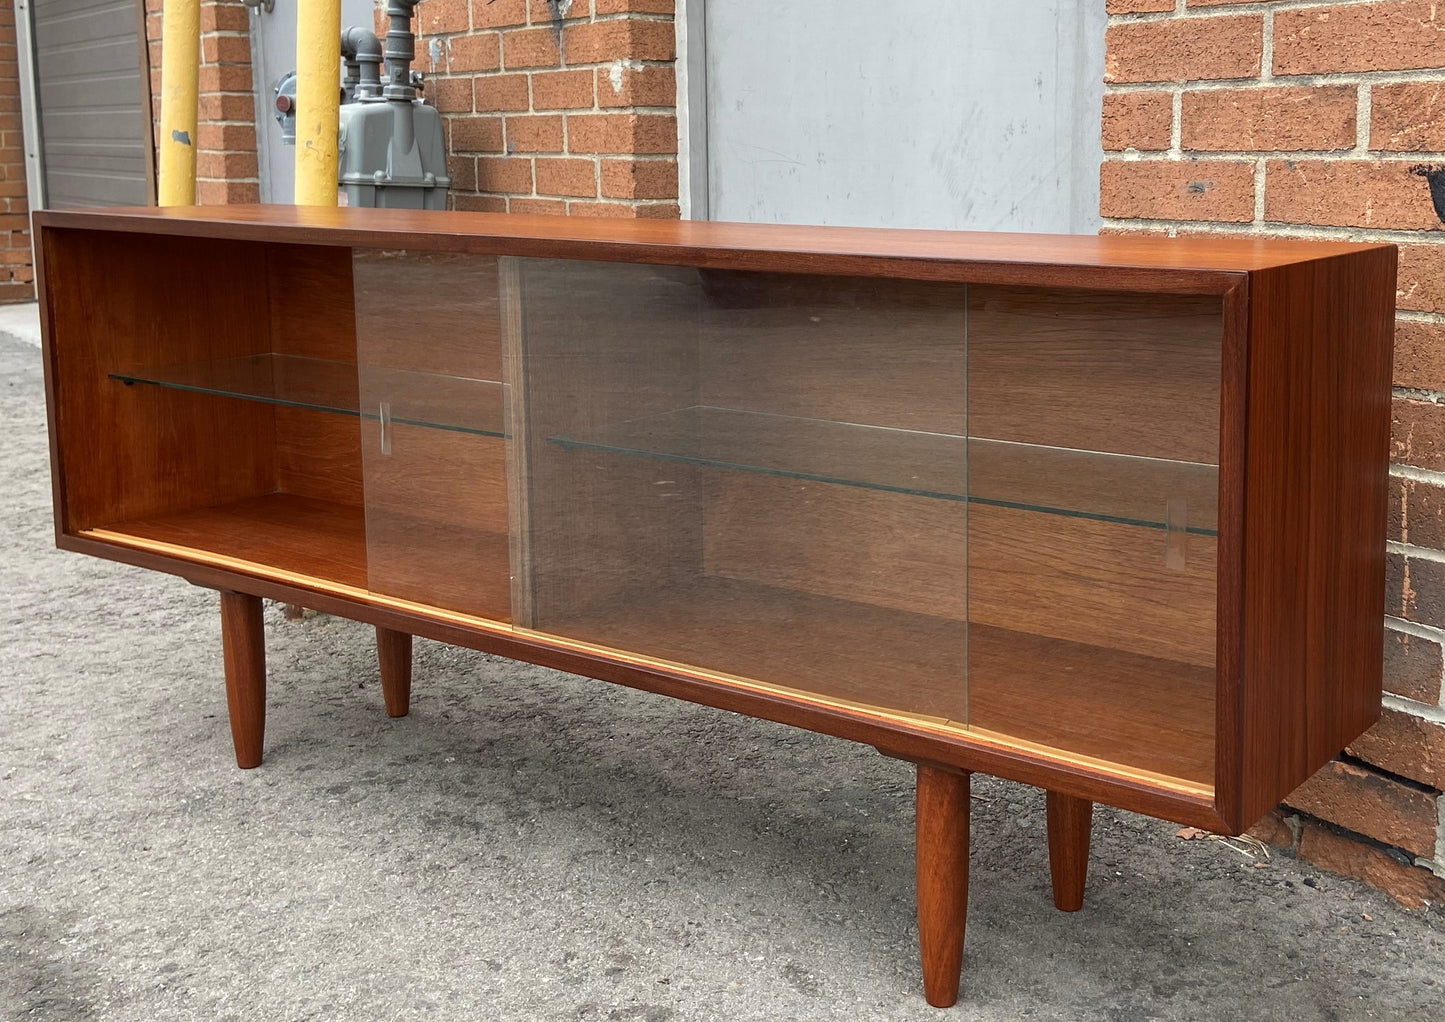 REFINISHED Mid Century Modern Teak Bookcase Display Media Console 60", Perfect